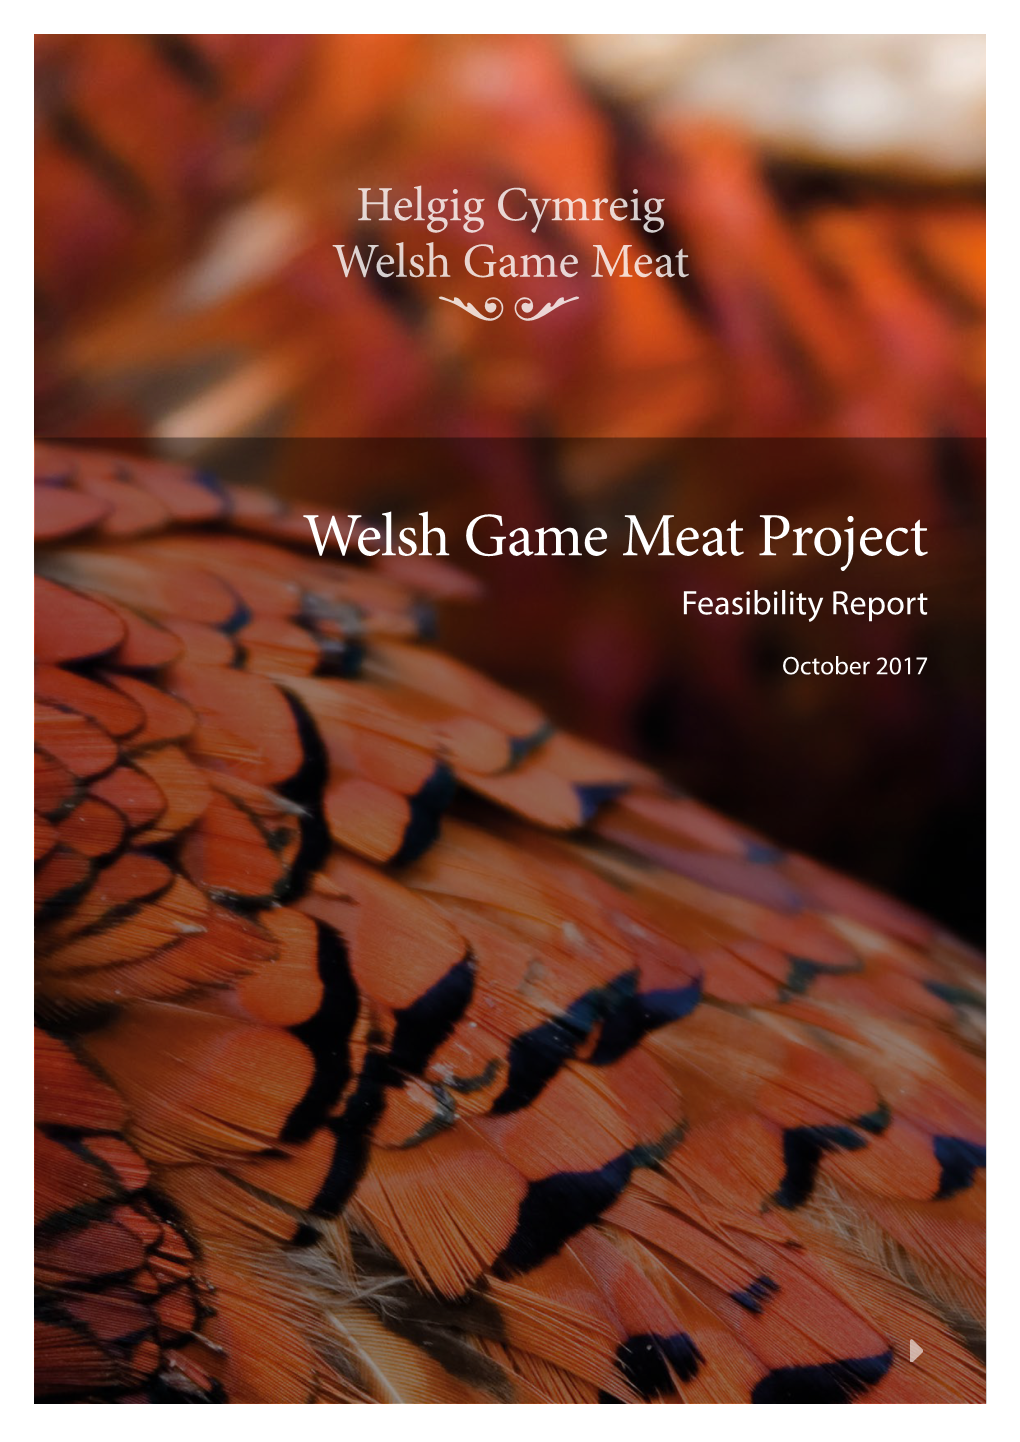 Welsh Game Meat Project Feasibility Report